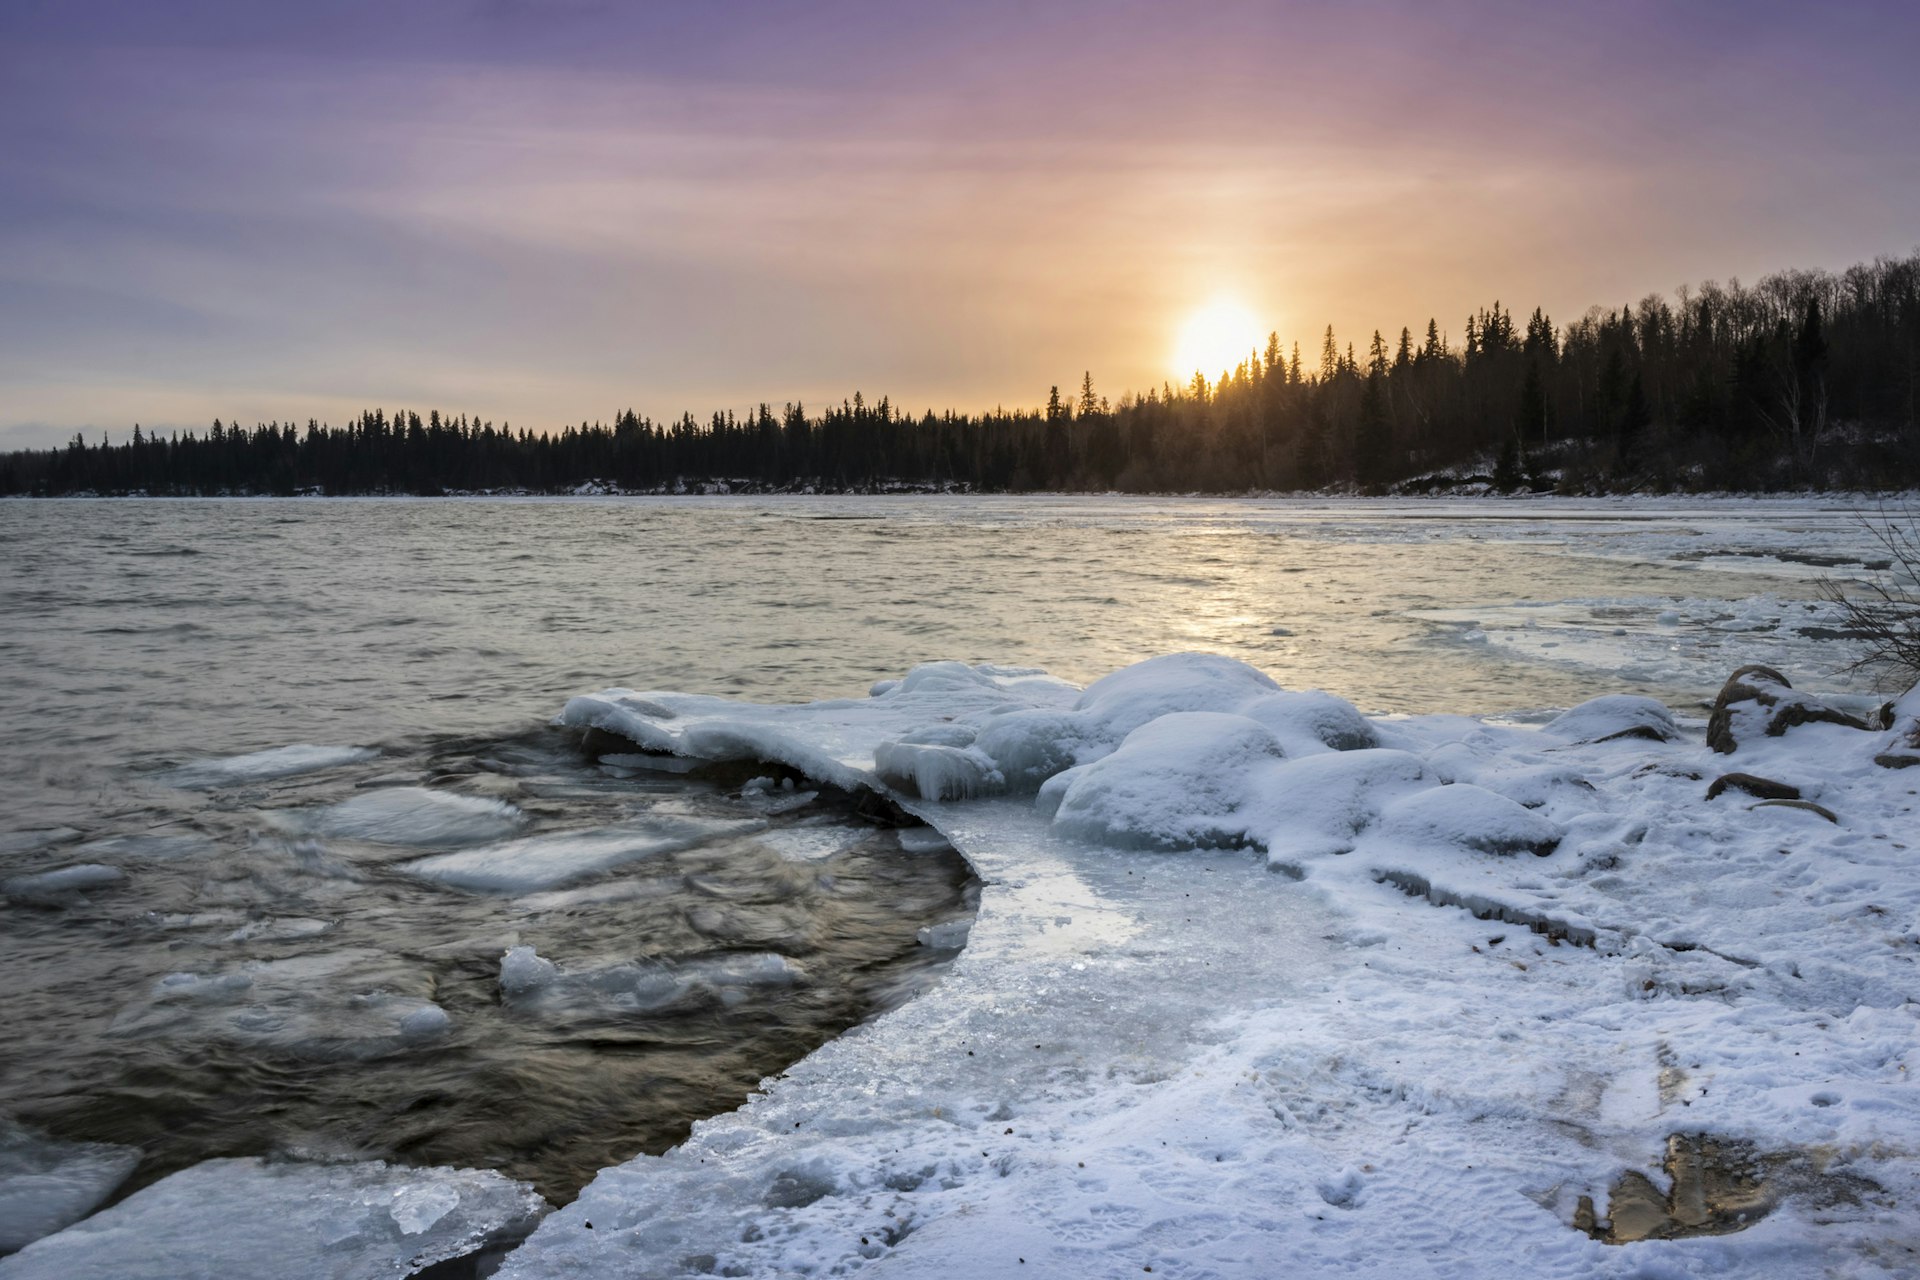 Beautiful vibrant sunset scene over the Provincial Park at Cold Lake, Alberta which has a snow-covered shoreline